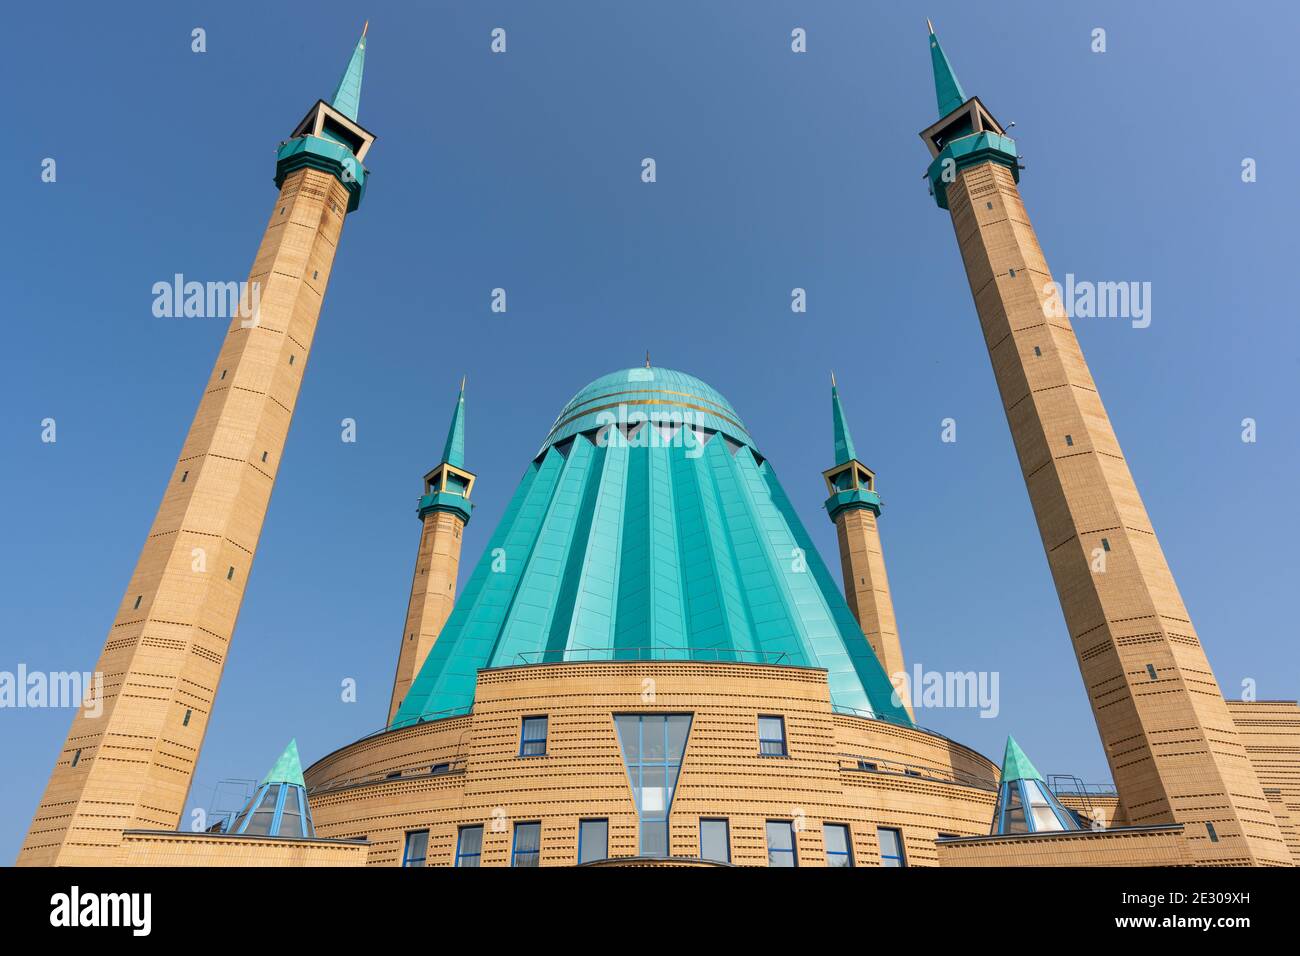 Pavlodar, Kazakhstan - July 27, 2020: the entrance of the Mashkhur Jusup Mosque with four minarets and blue roof. Stock Photo